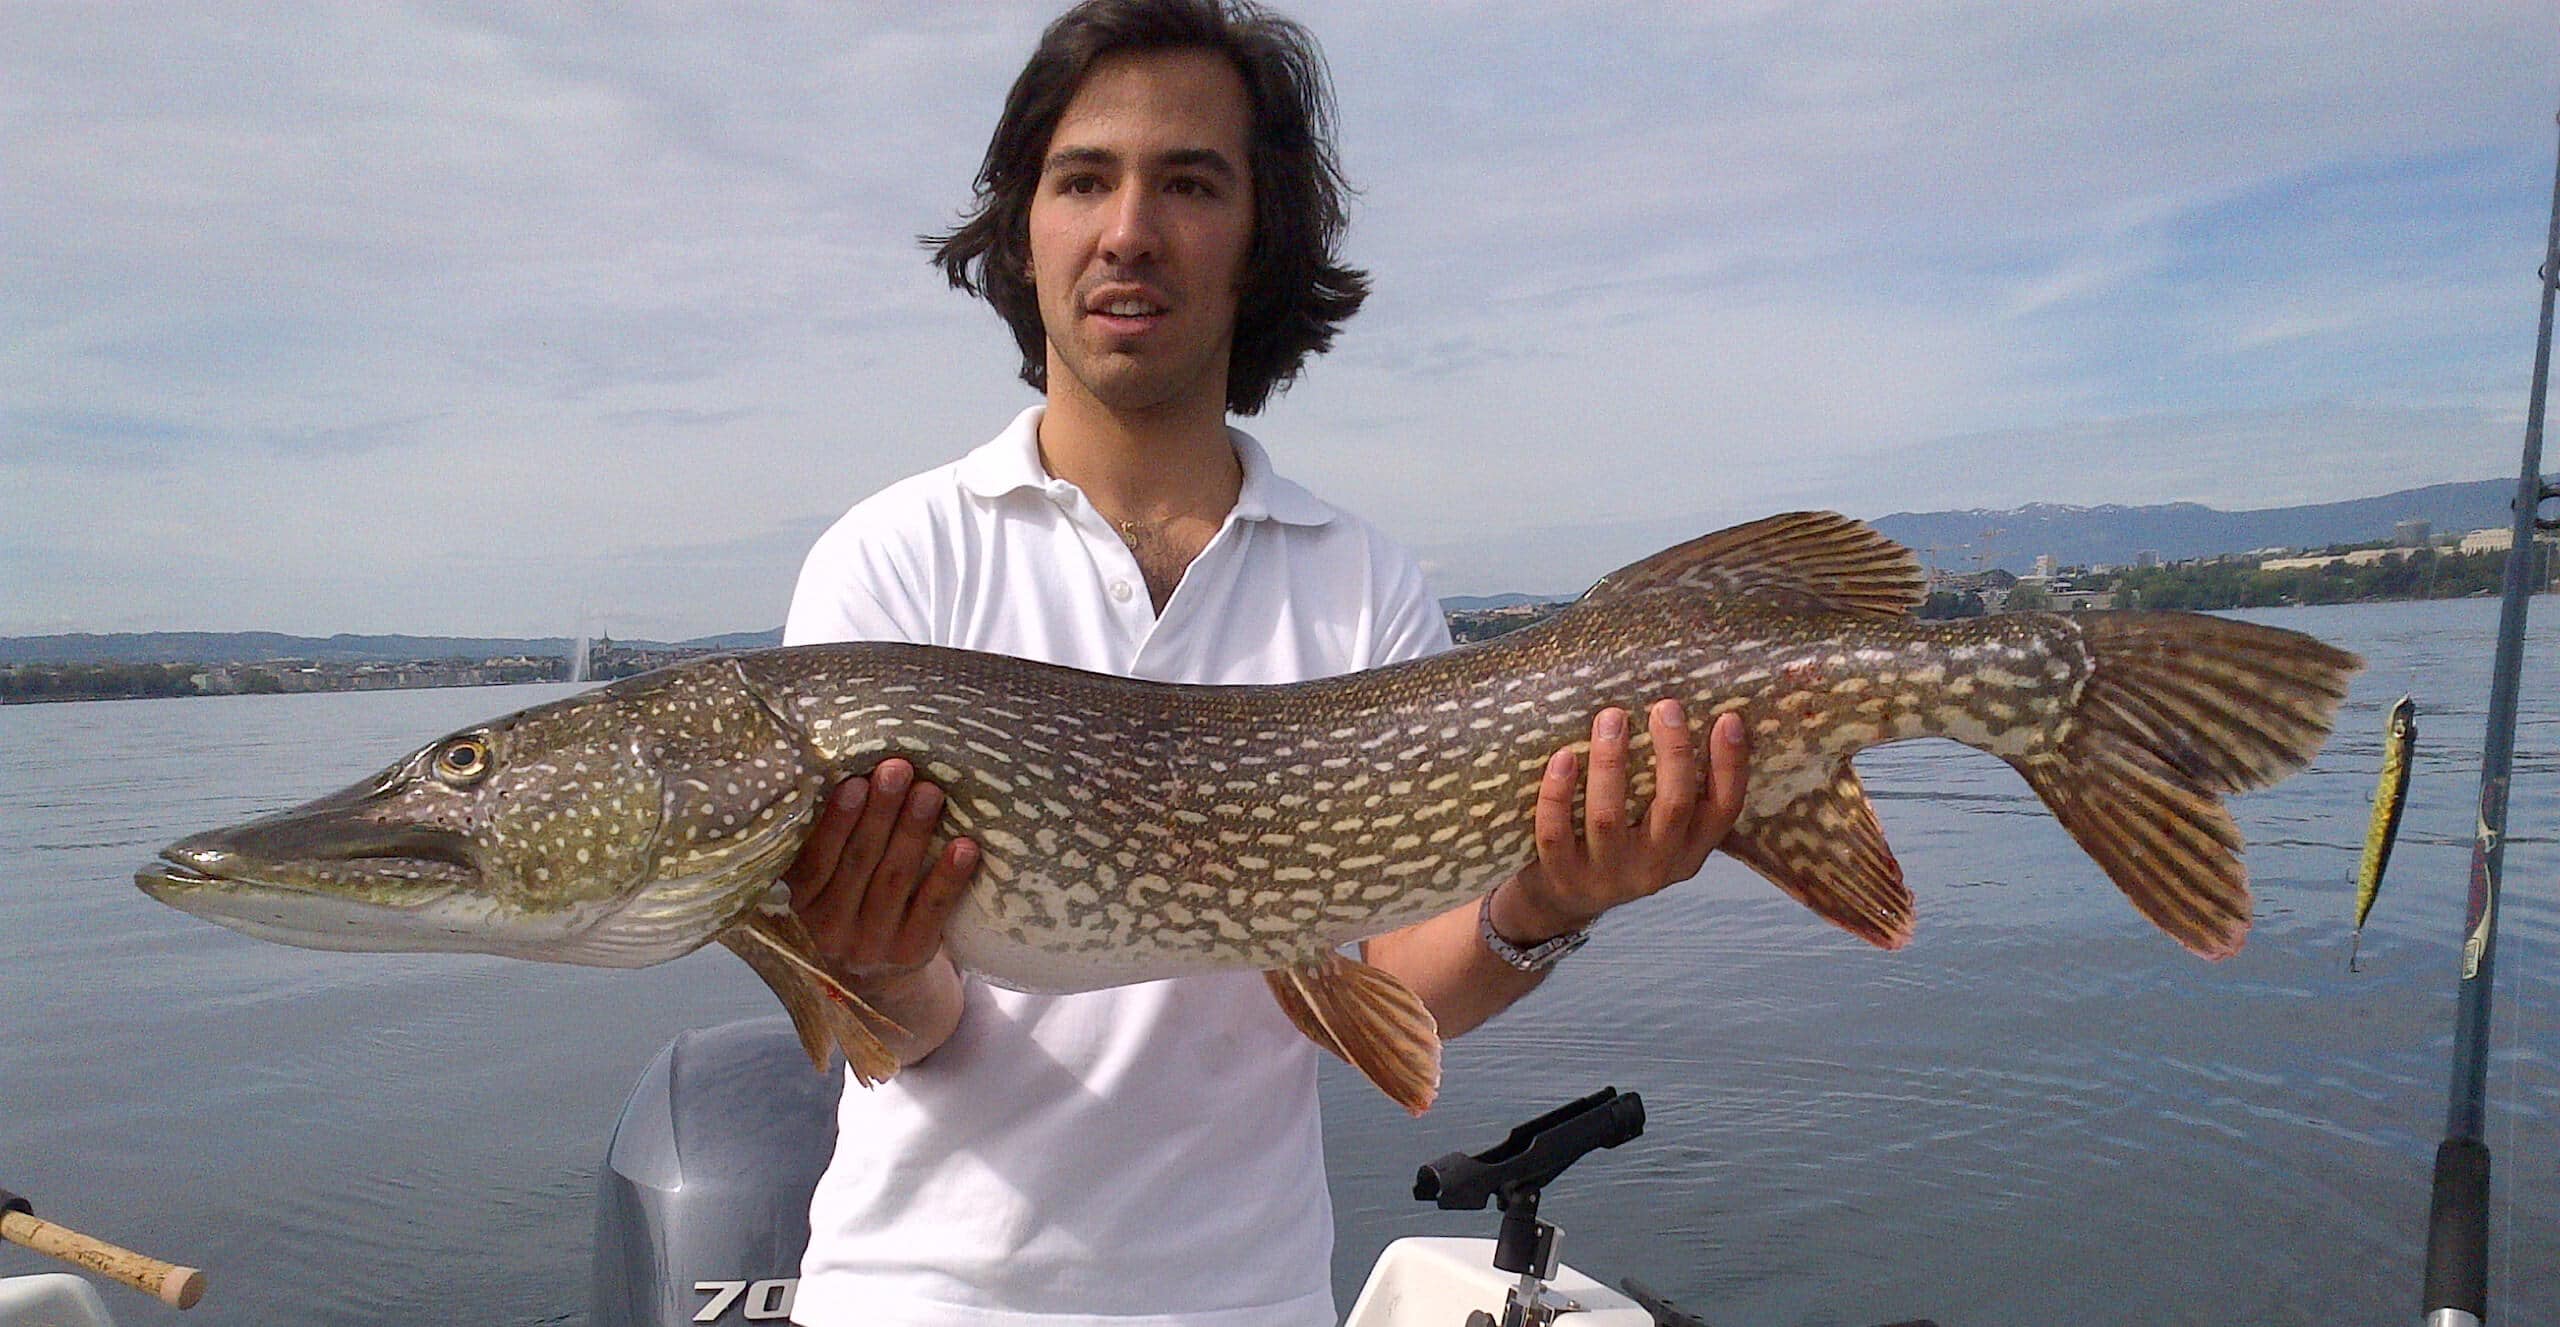 A man showing a big pike ("brochet") fished in Lake Geneva